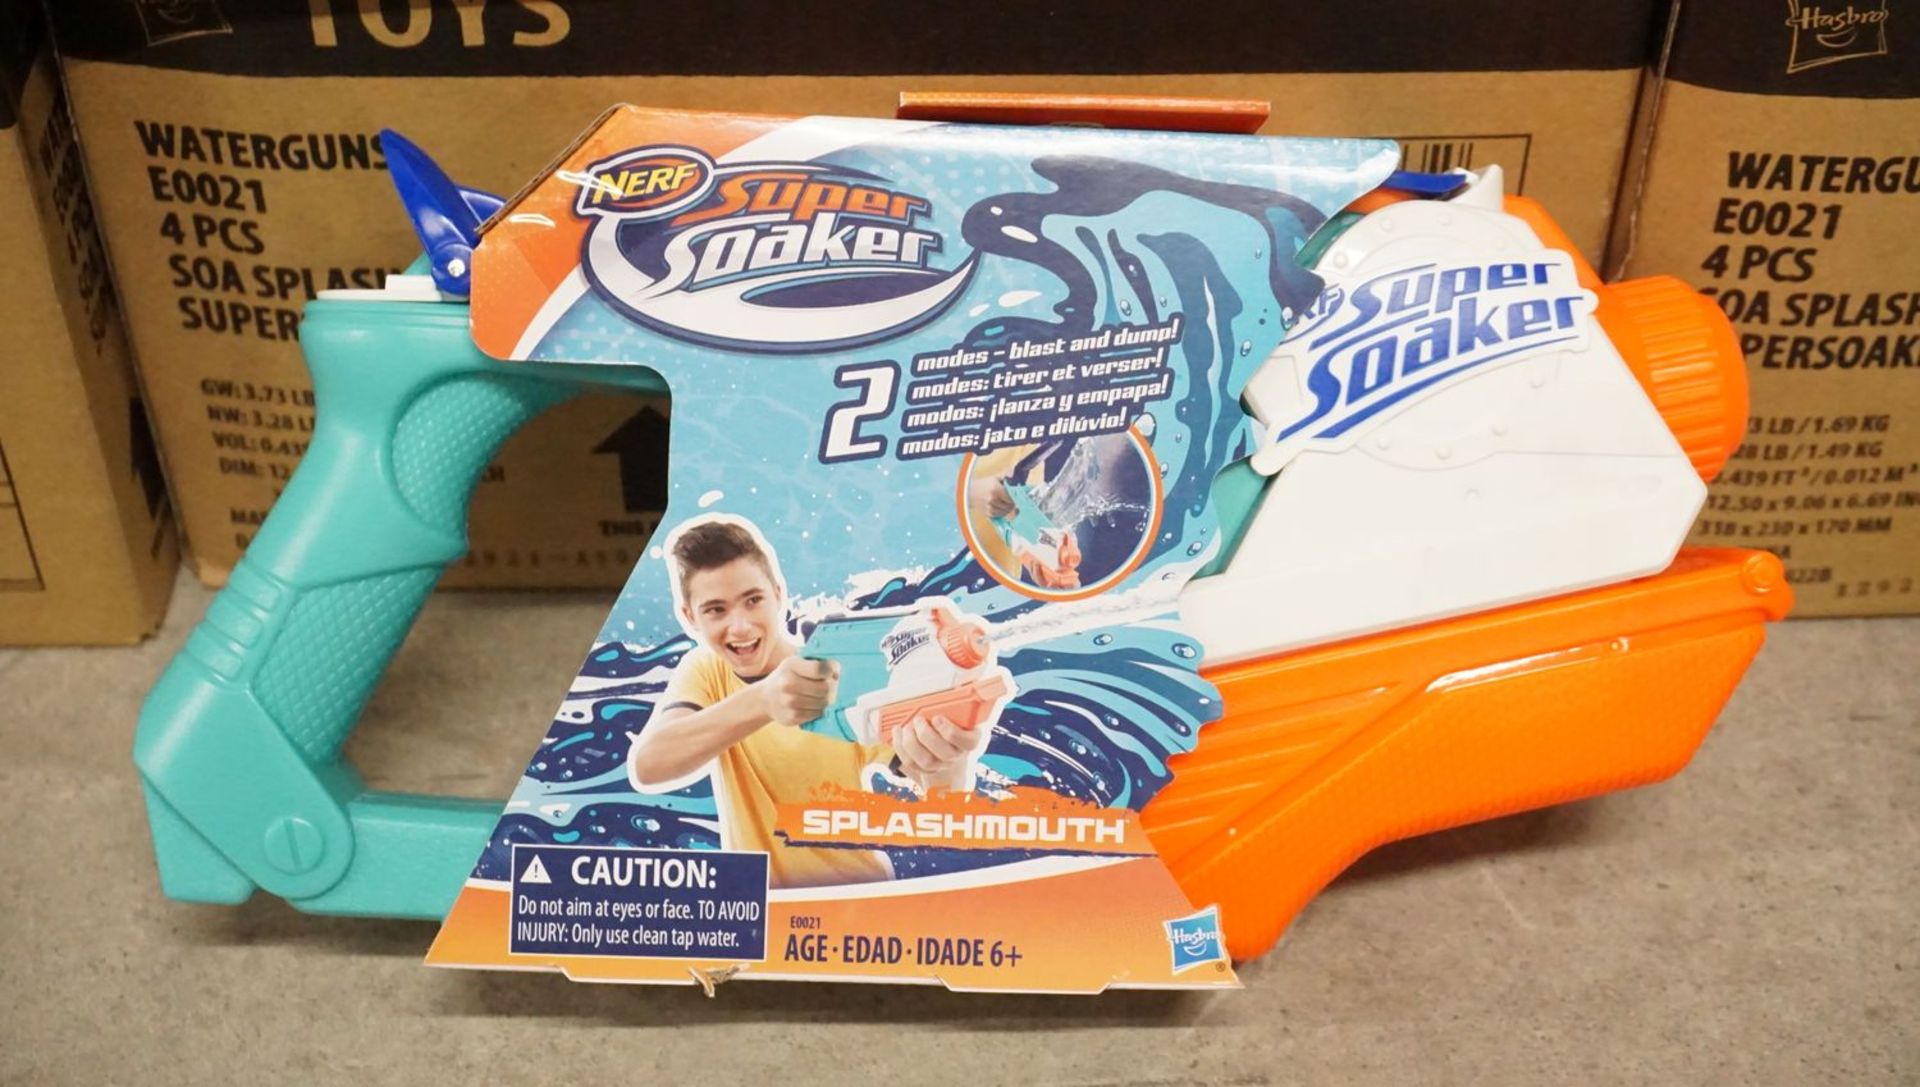 UNITS - NERF HASBRO SUPER SOAKERS (9 BOXES TOTAL) - Image 2 of 2